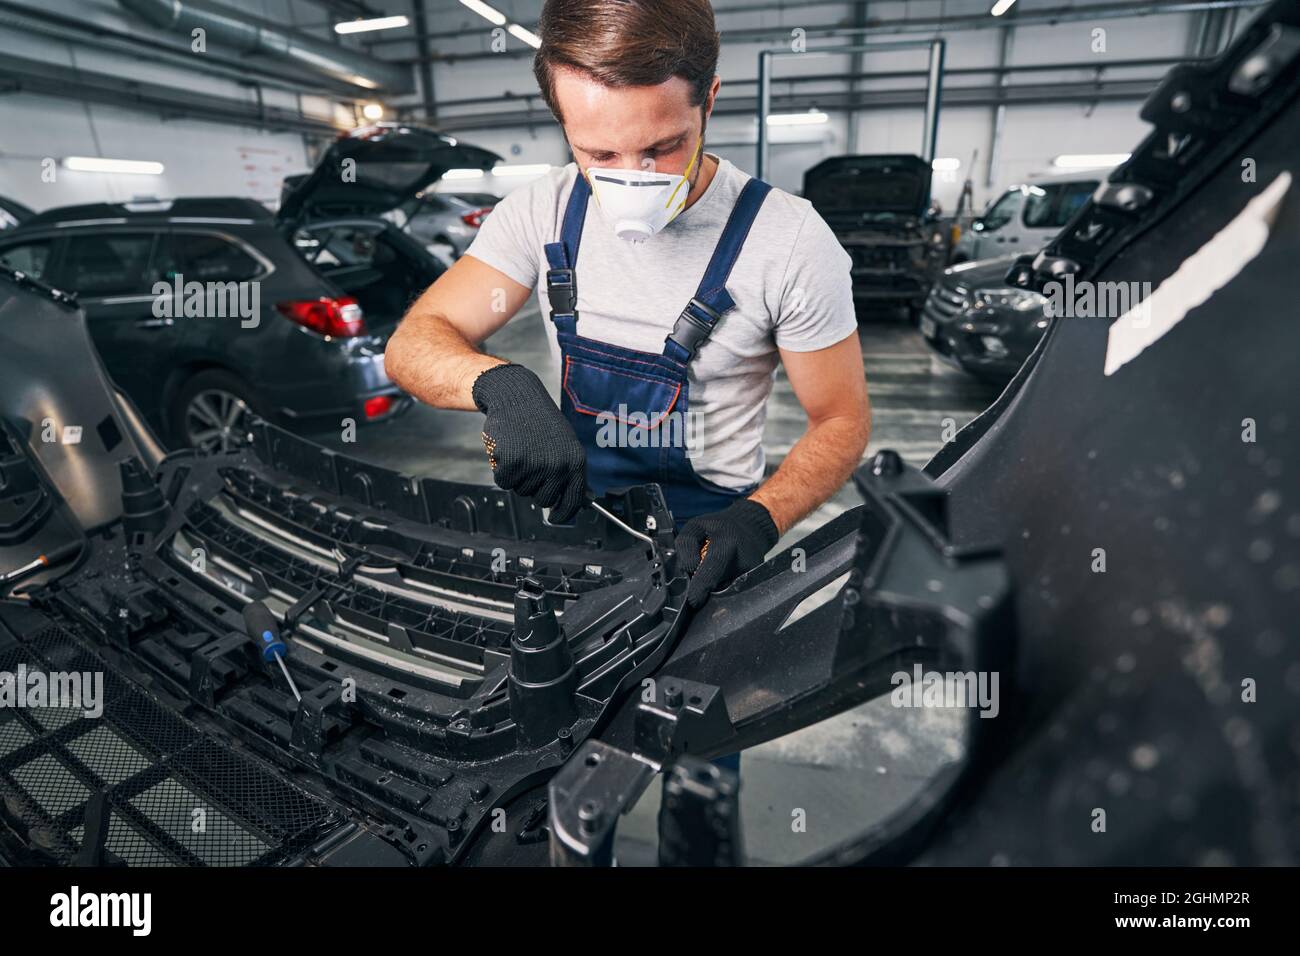 Car repairman reaching inside a car with wrench Stock Photo